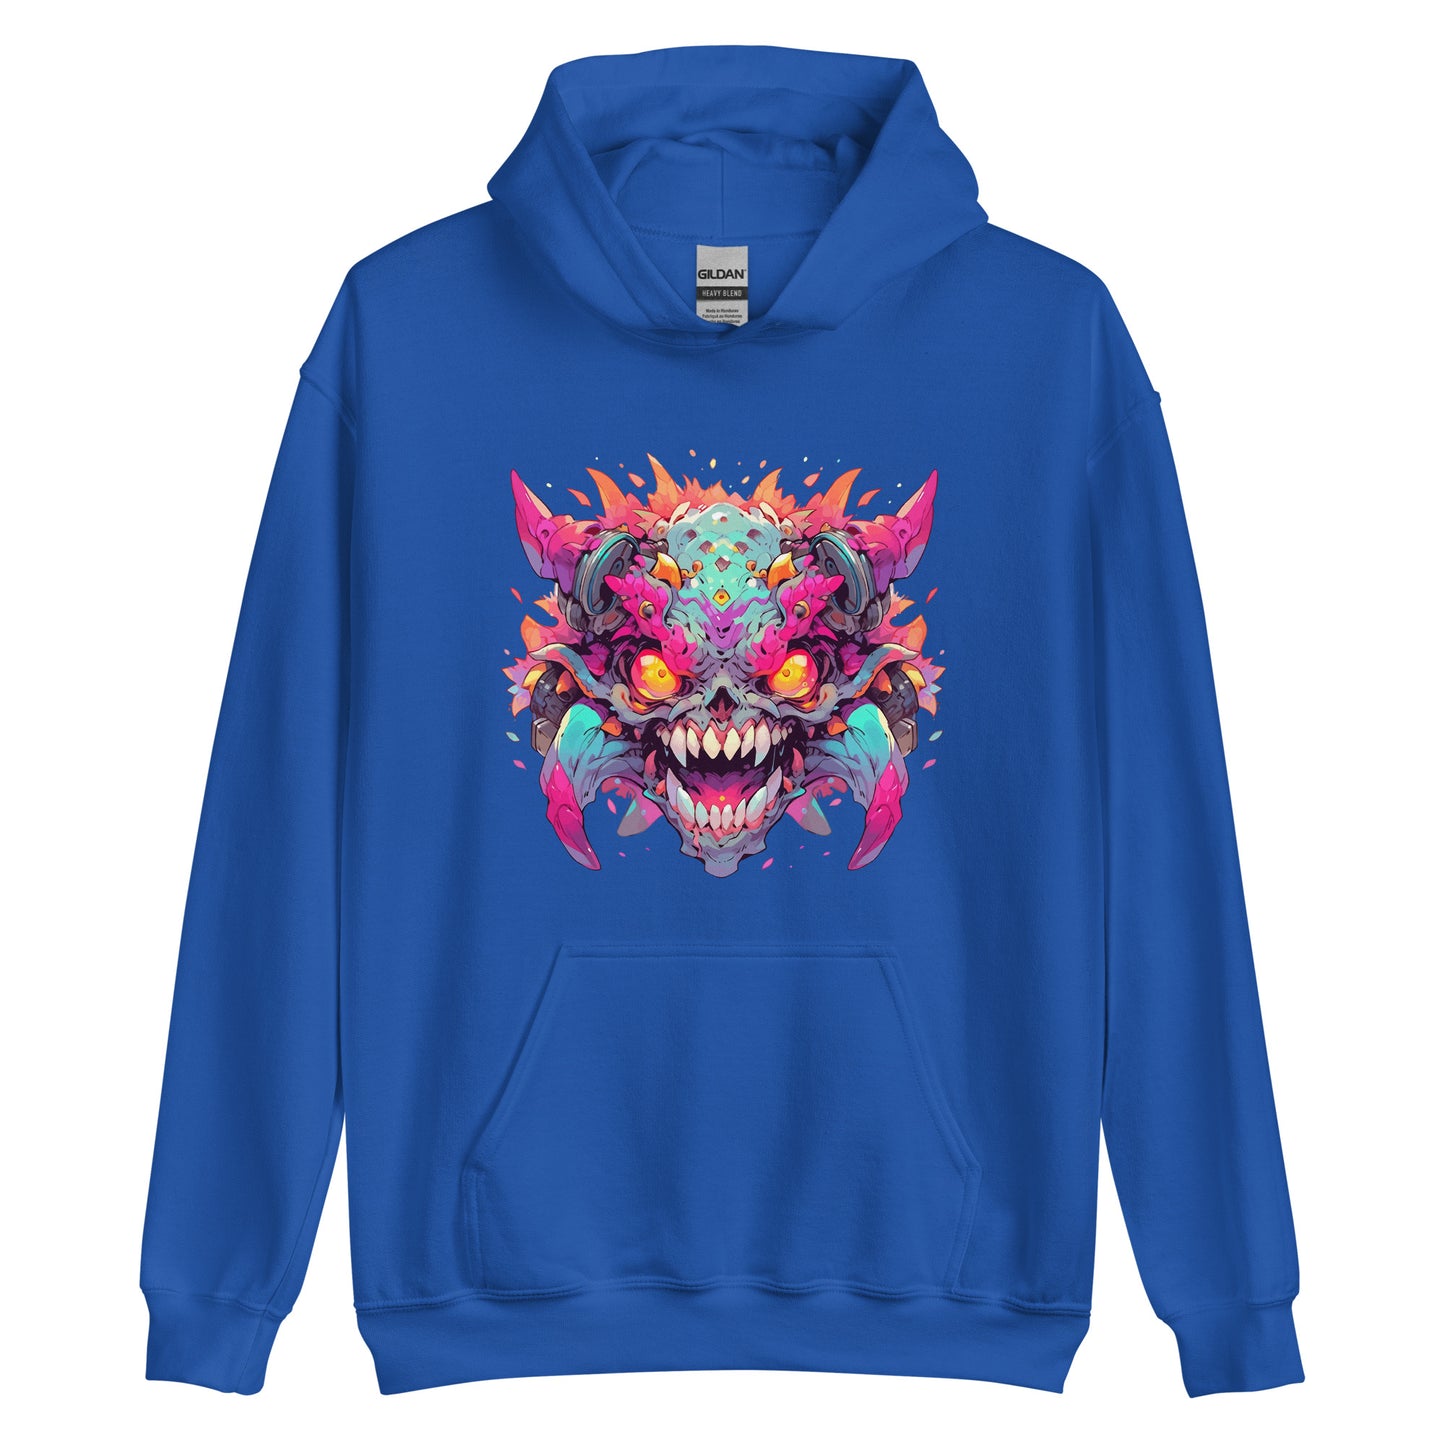 Horned and toothy monster, Crazy colorful illustration, Fantastic yellow evil eyes, Wild mutant - Unisex Hoodie